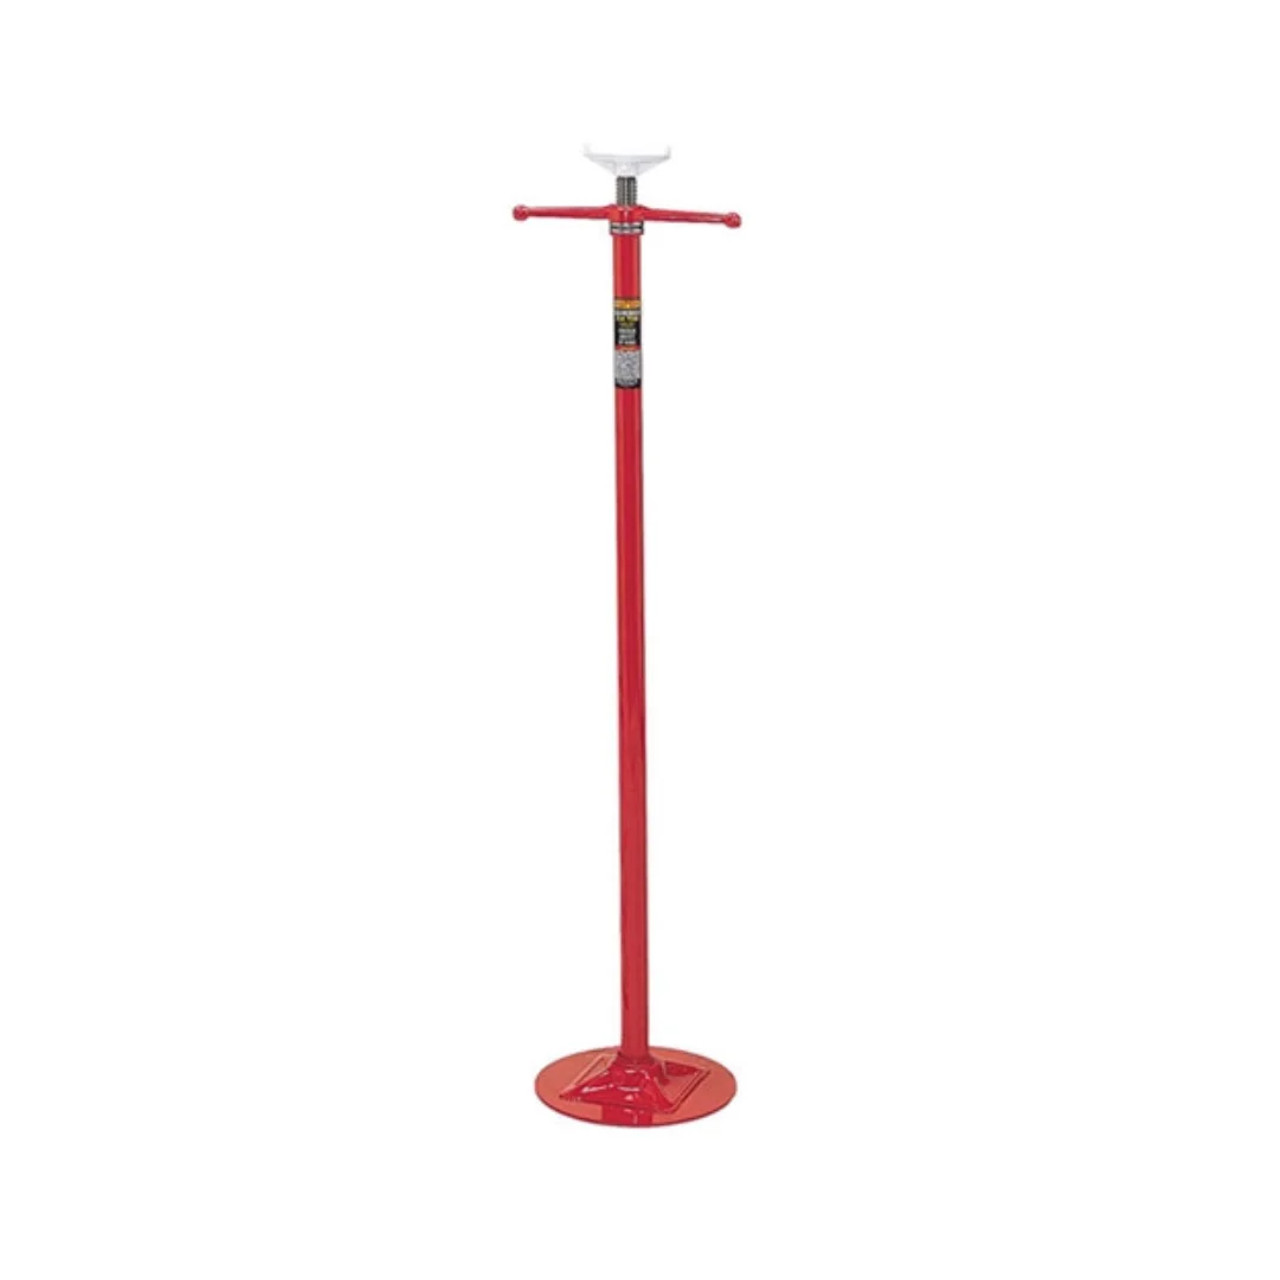 Norco 81033A 34 Ton Capacity Under Hoist Stand